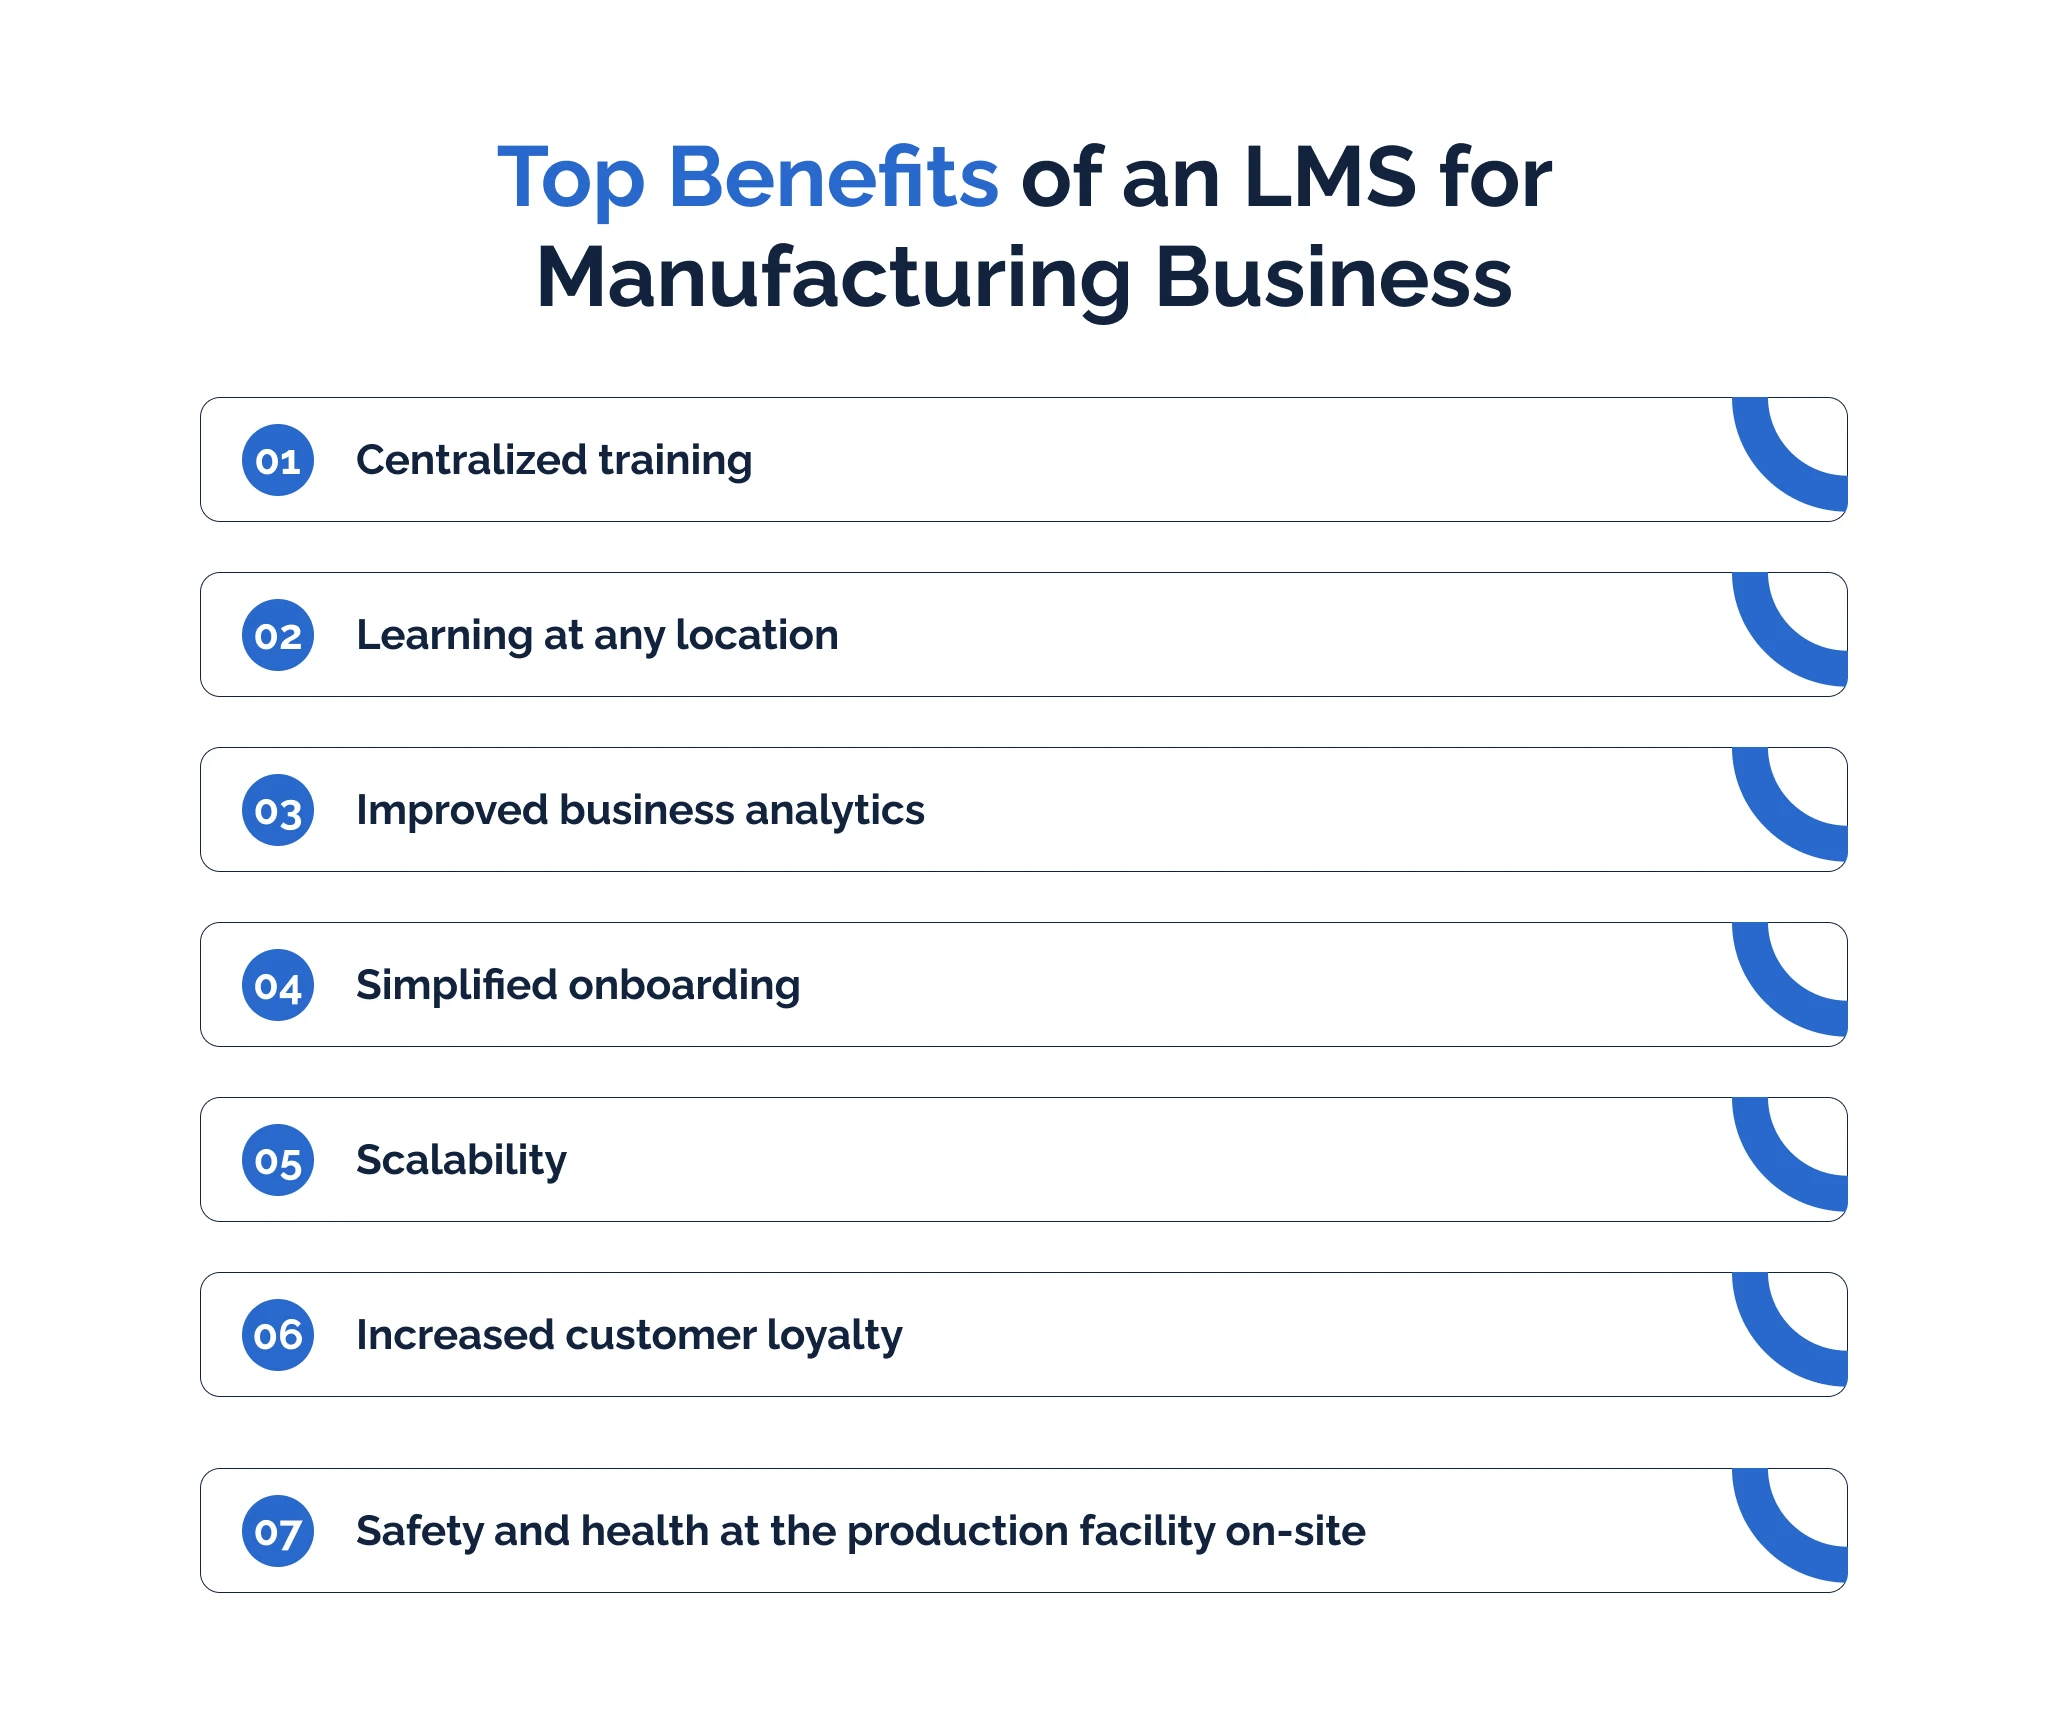 Top Benefits of an LMS for Manufacturing Business